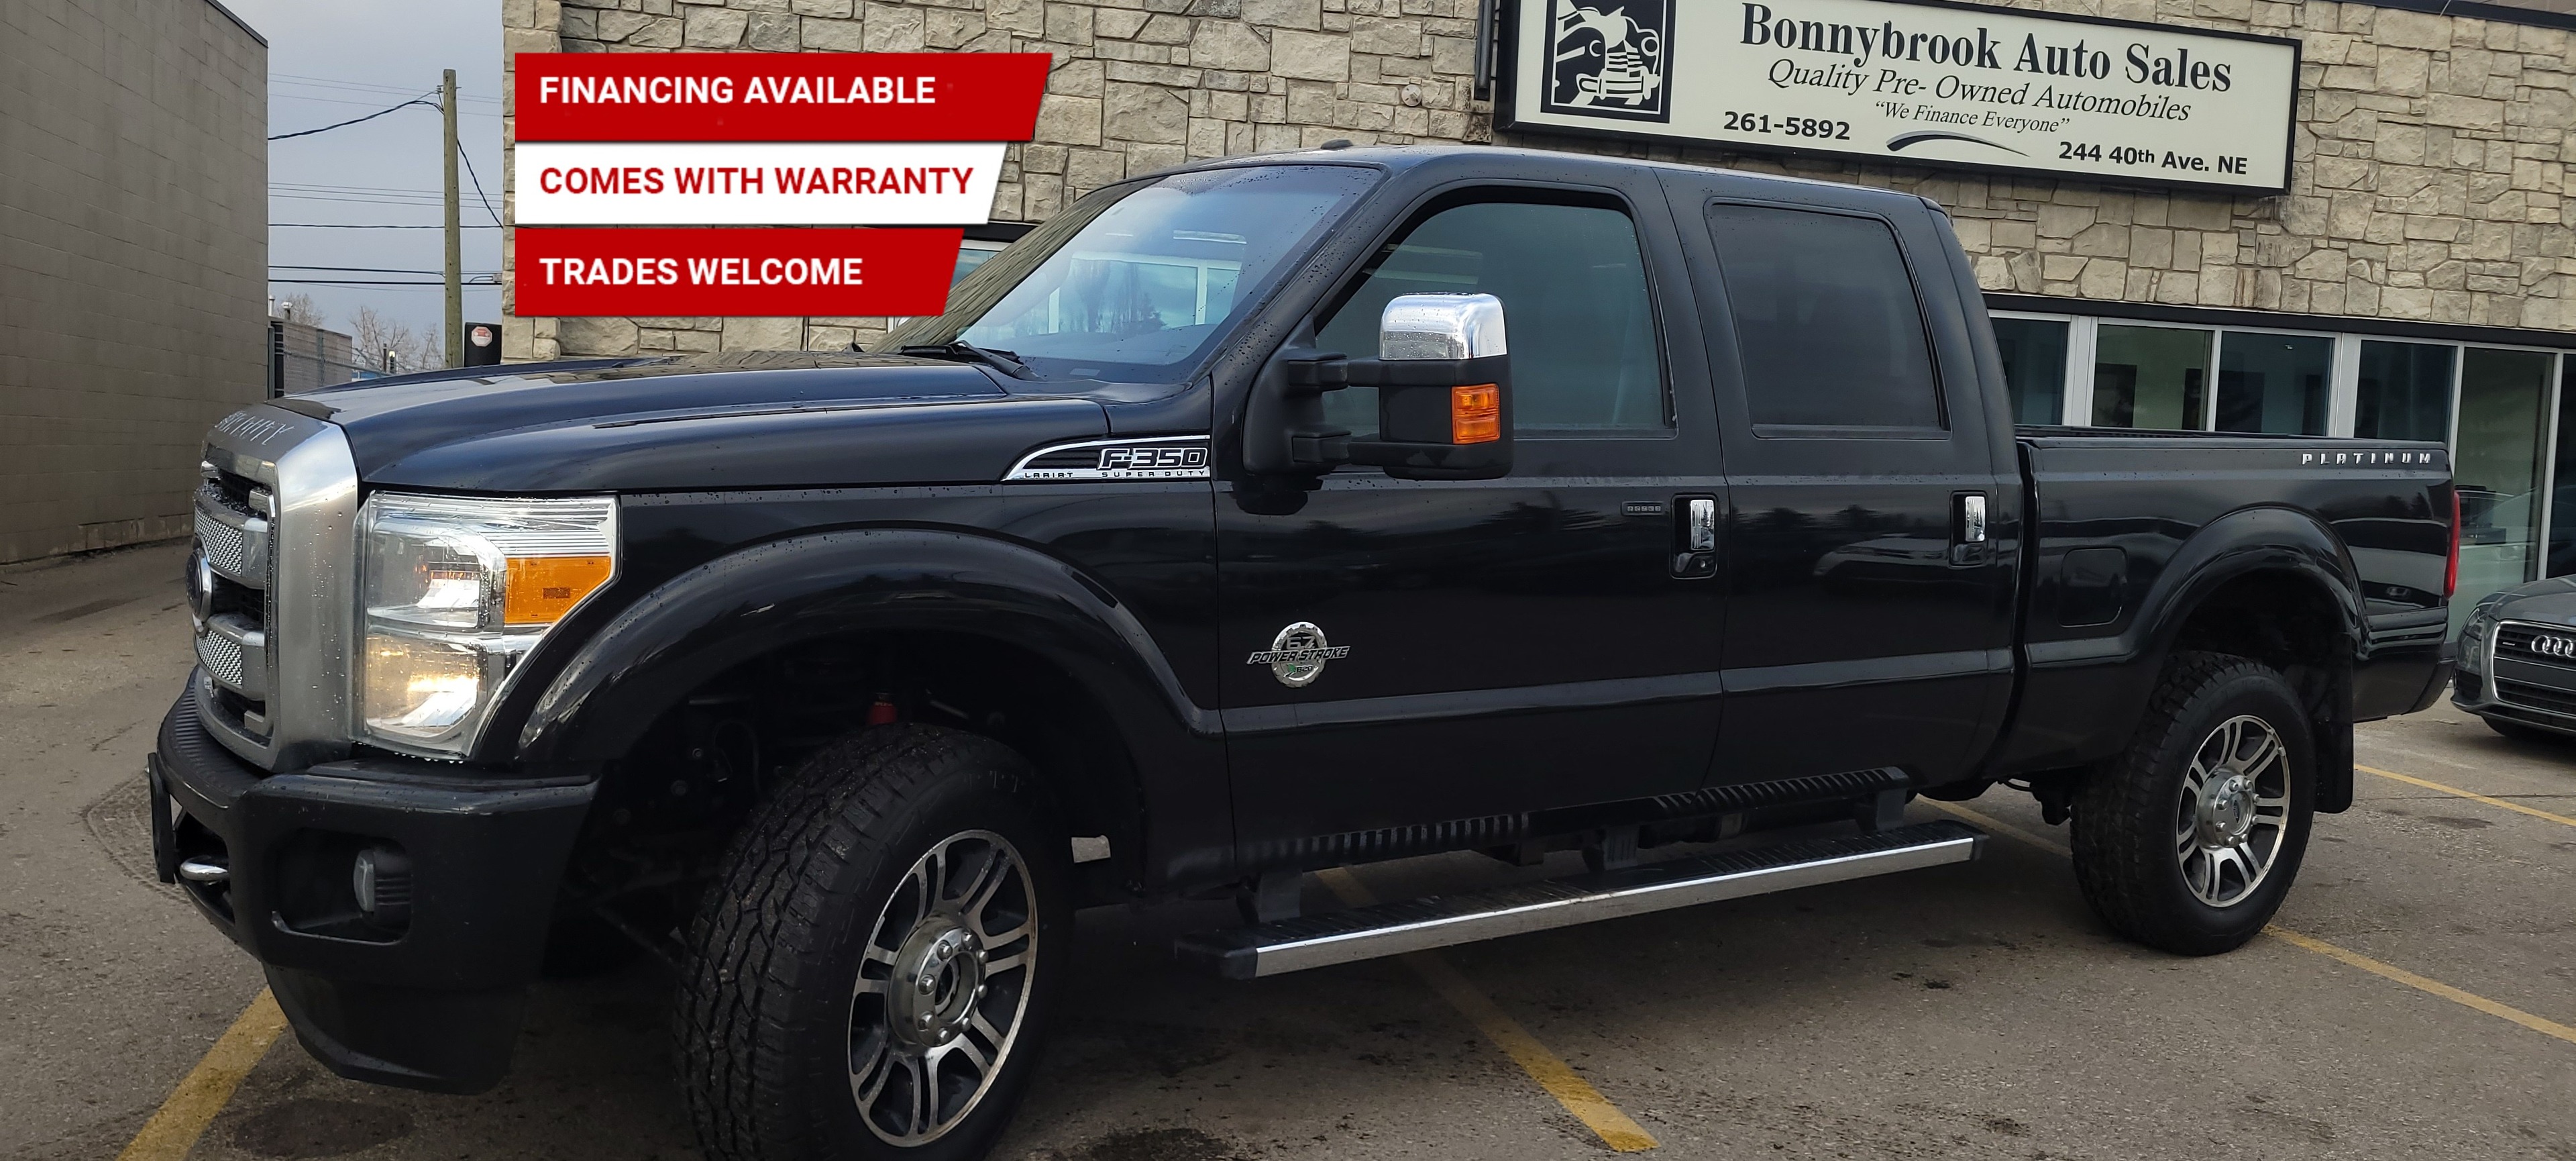 2015 Ford F-350 4WD Crew Cab/Lariat/Leather/Sunroof/Navigation